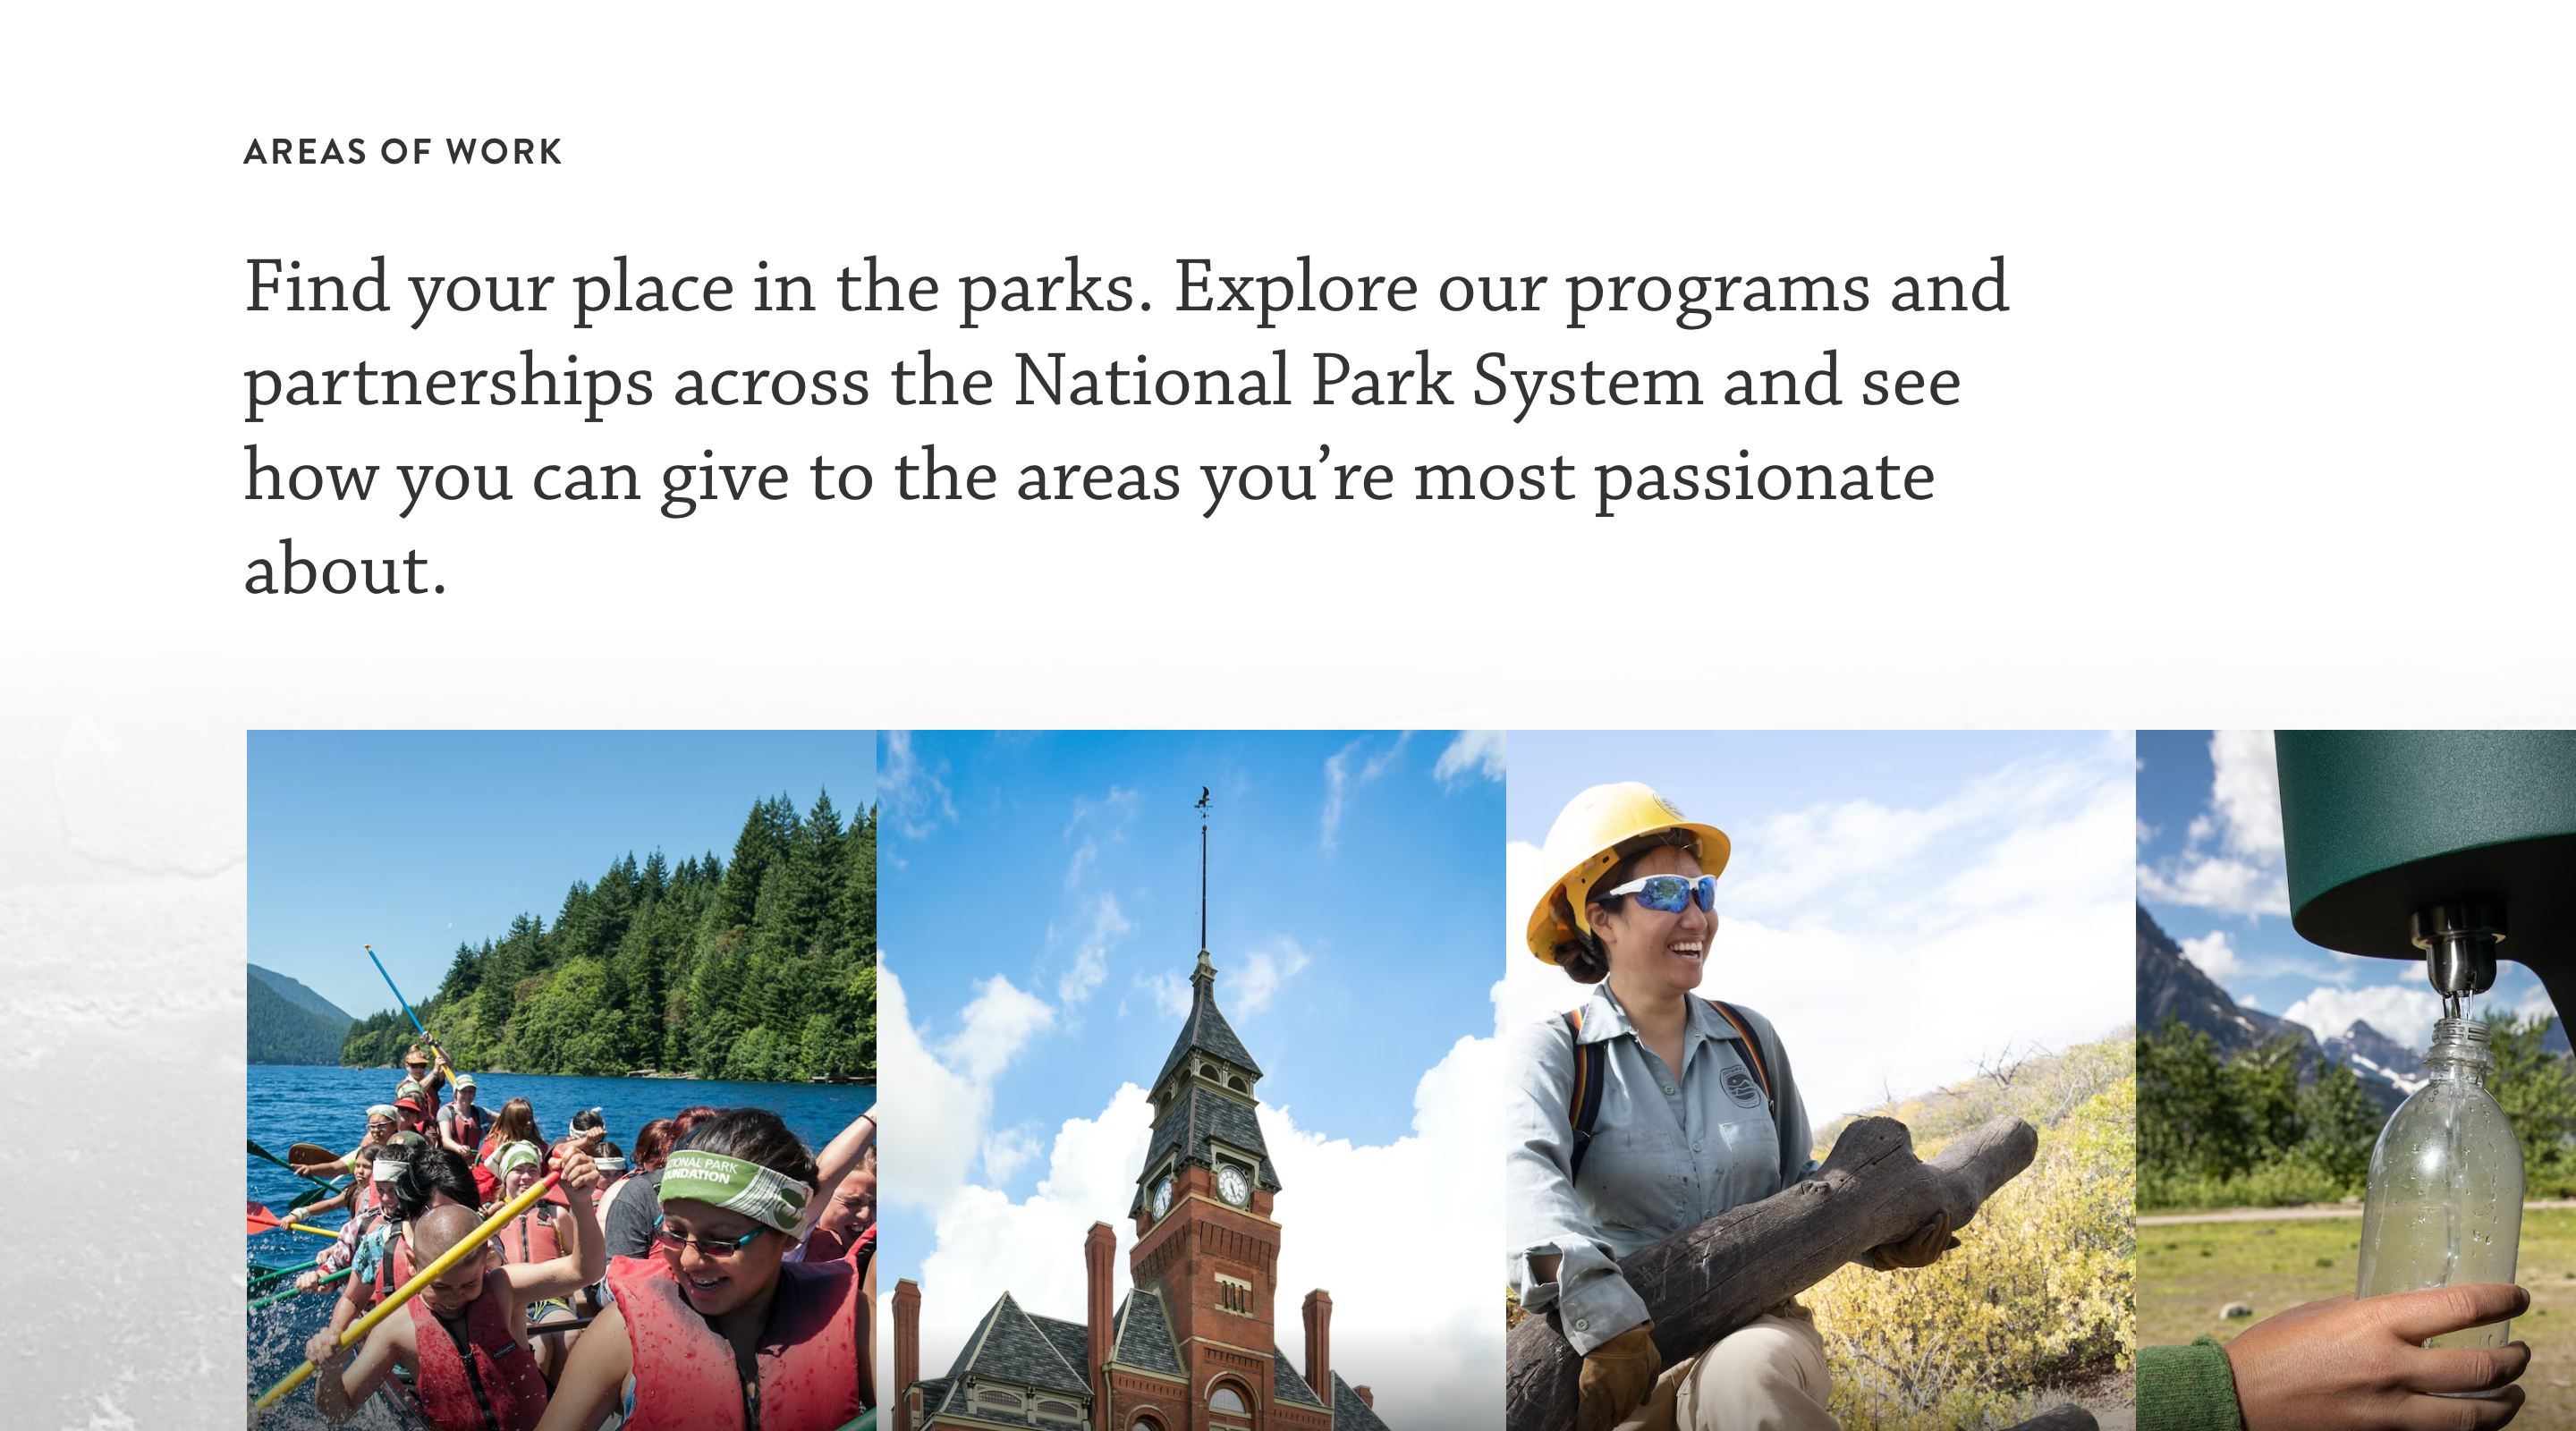 Screenshot of the 'Areas of work' section on the National Park Foundation website. The section contains an introduction paragraph followed by a series of images that represent the different programs and partnerships within the National Park System.